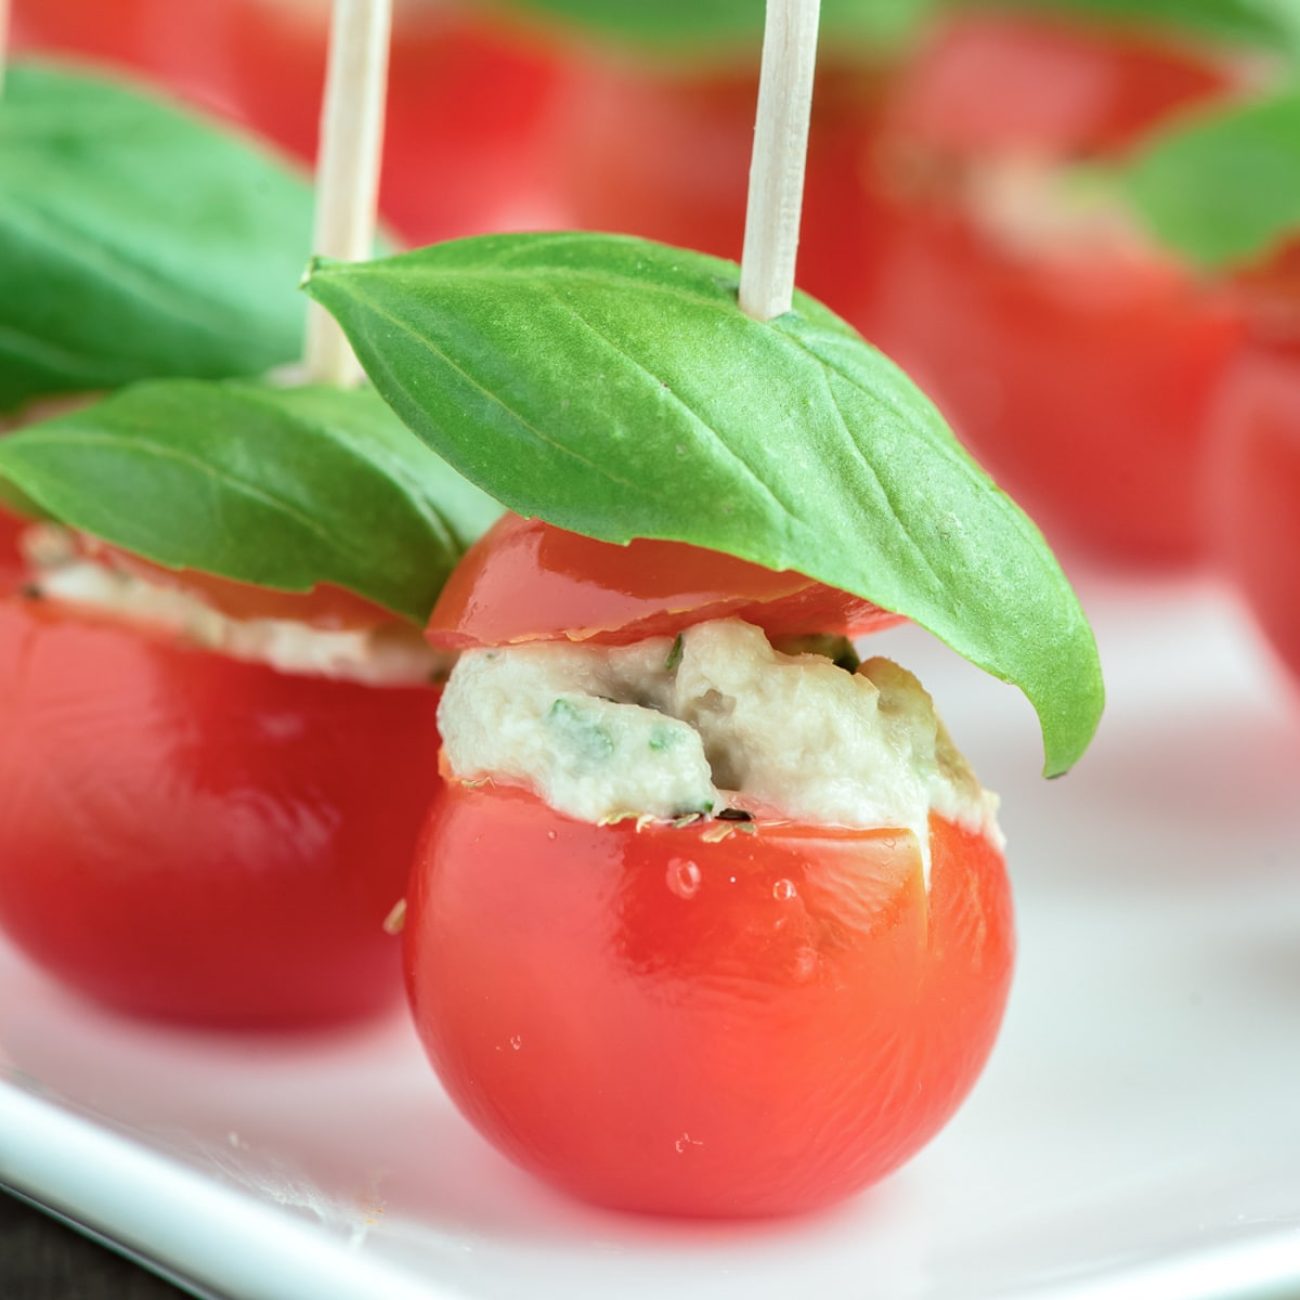 Mouthwatering Cherry Tomatoes Stuffed with Herbed Cheese Filling